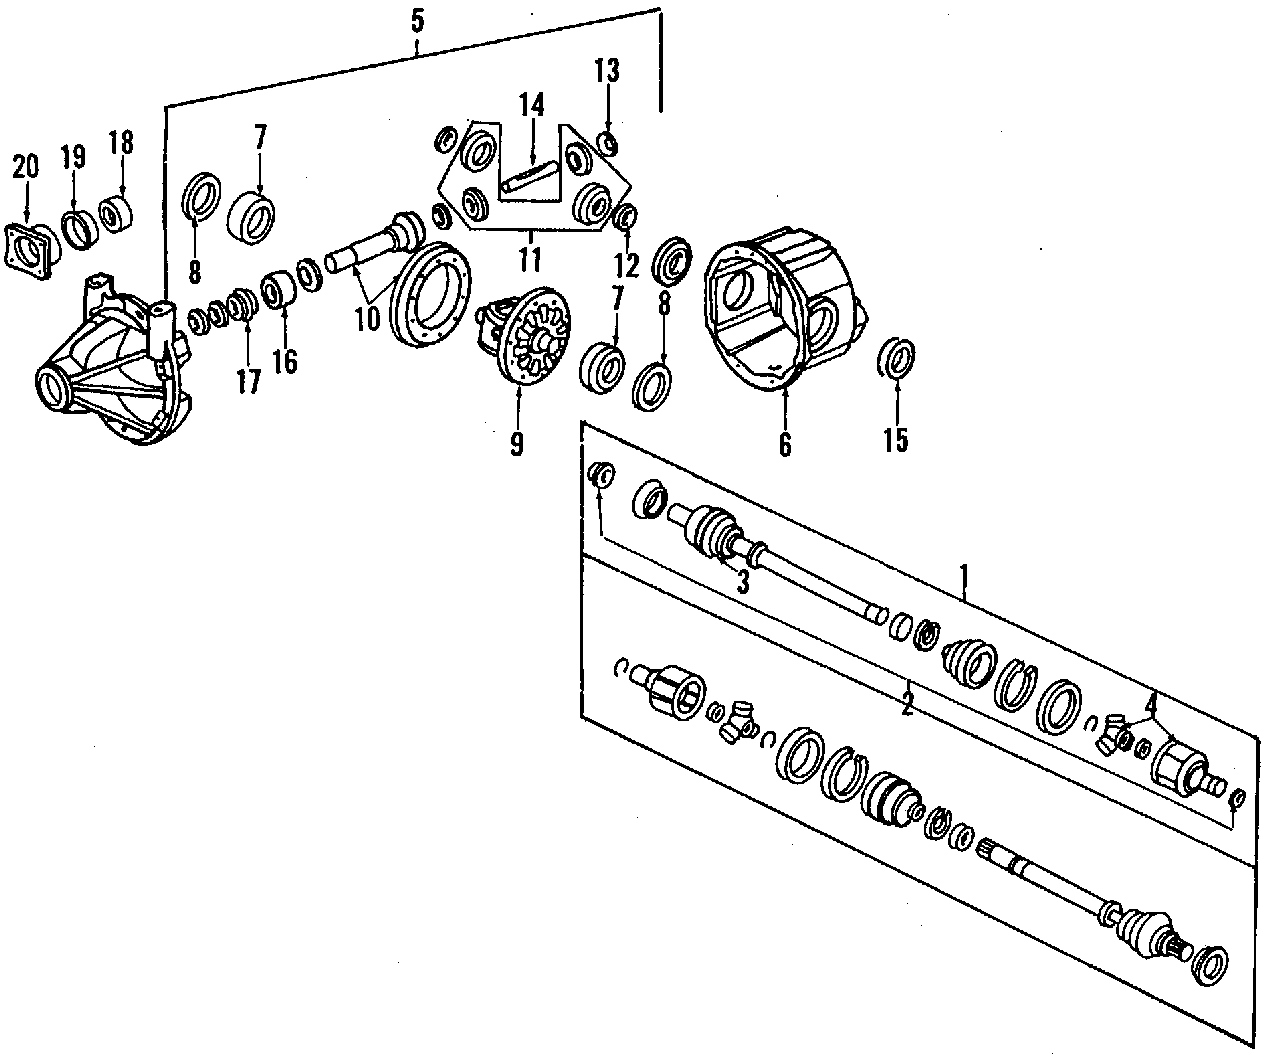 REAR AXLE. AXLE SHAFTS & JOINTS. DIFFERENTIAL. PROPELLER SHAFT.https://images.simplepart.com/images/parts/motor/fullsize/F640360.png